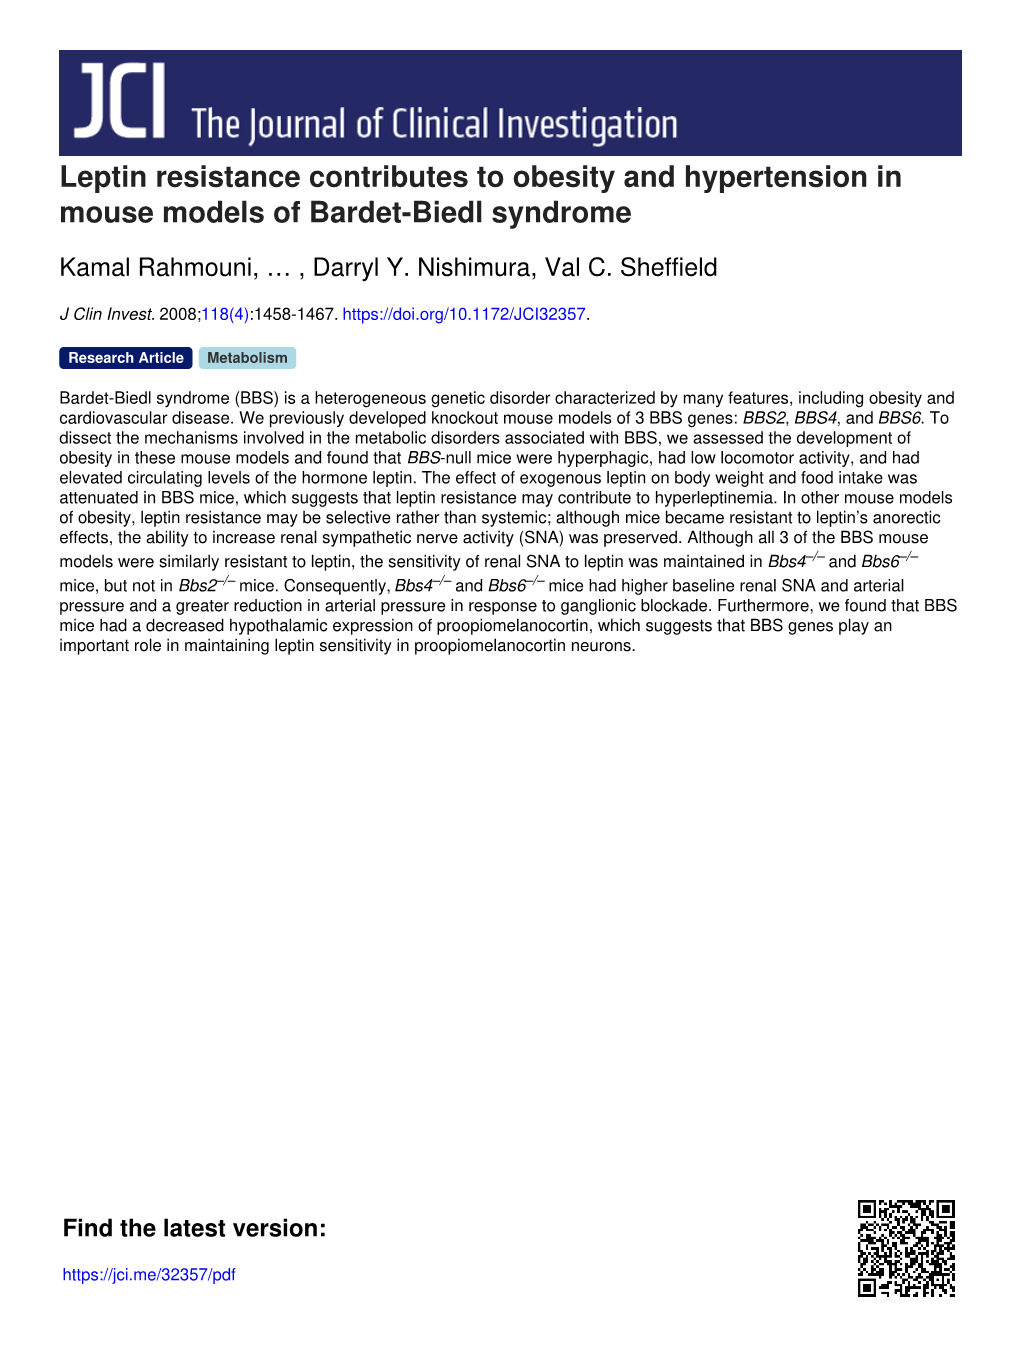 Leptin Resistance Contributes to Obesity and Hypertension in Mouse Models of Bardet-Biedl Syndrome